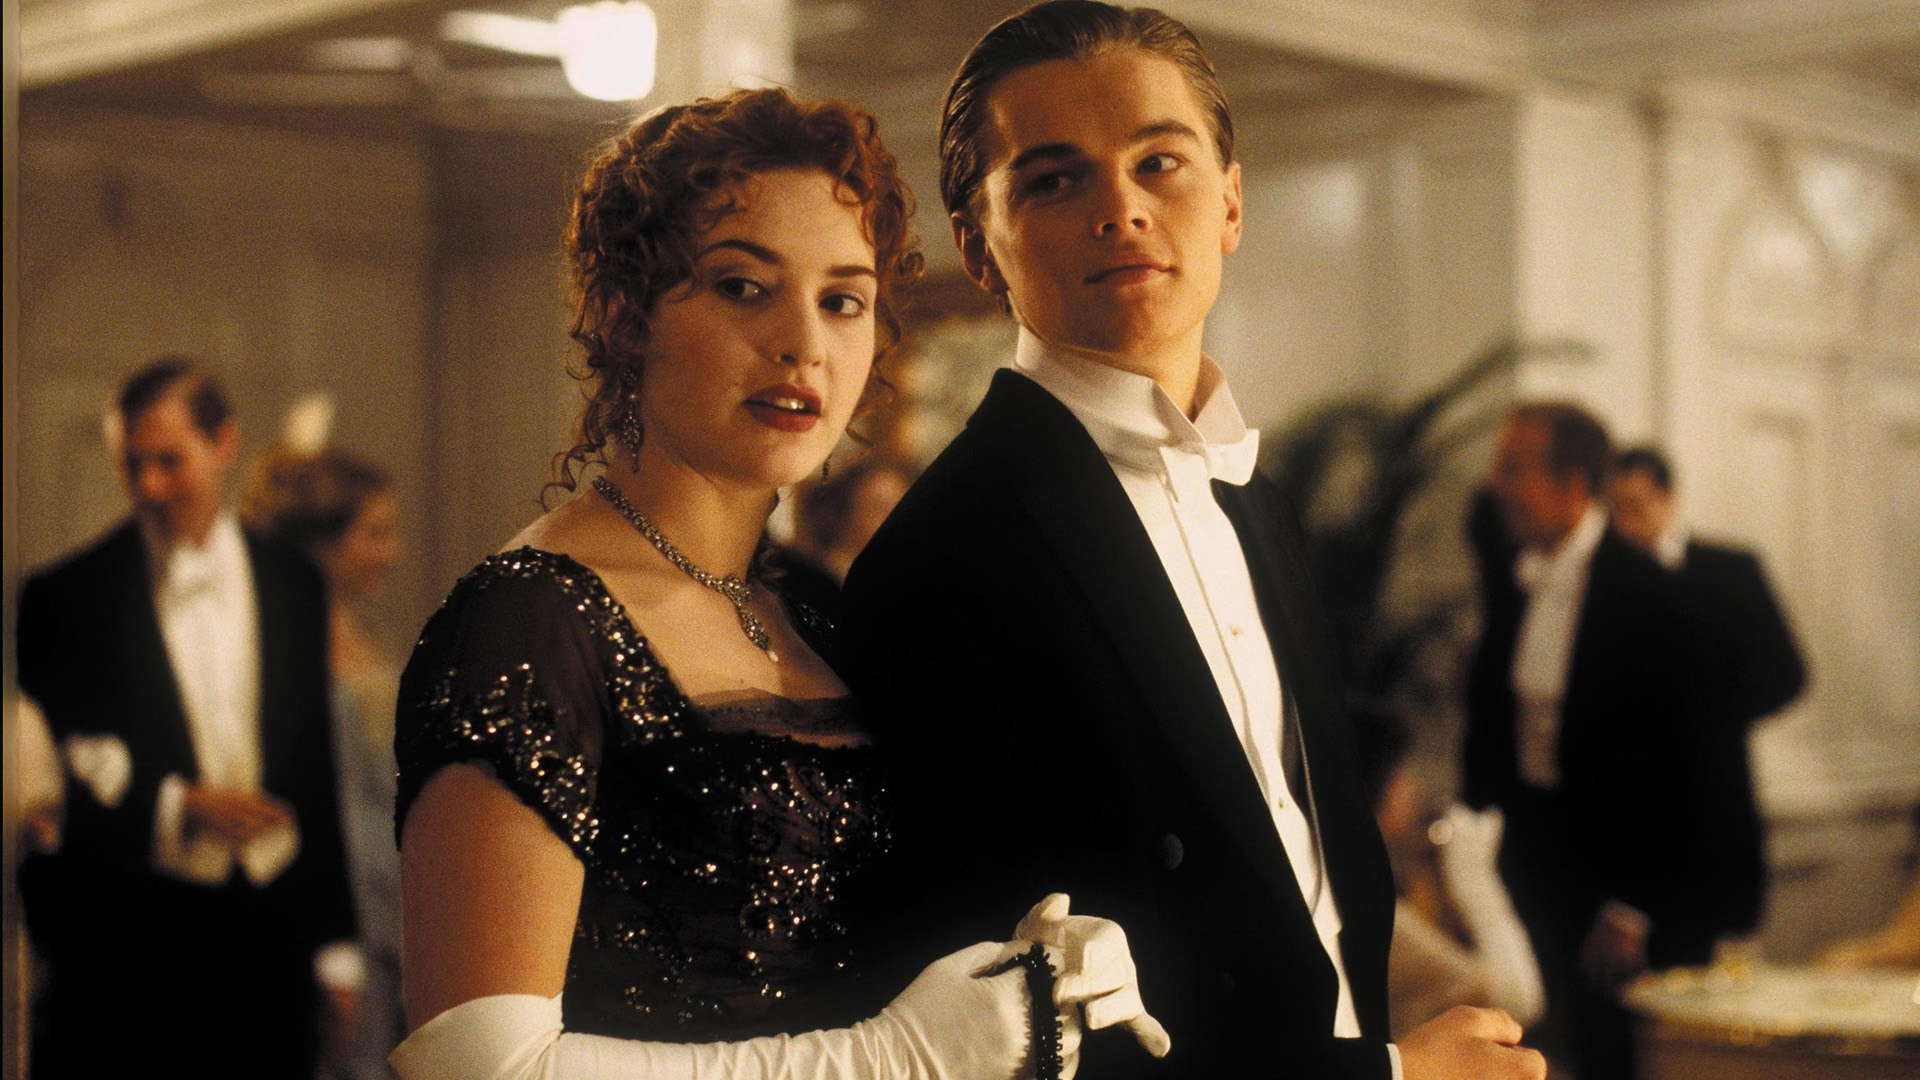 5 Reasons Fans Don't Like Cameron's Titanic All That Much